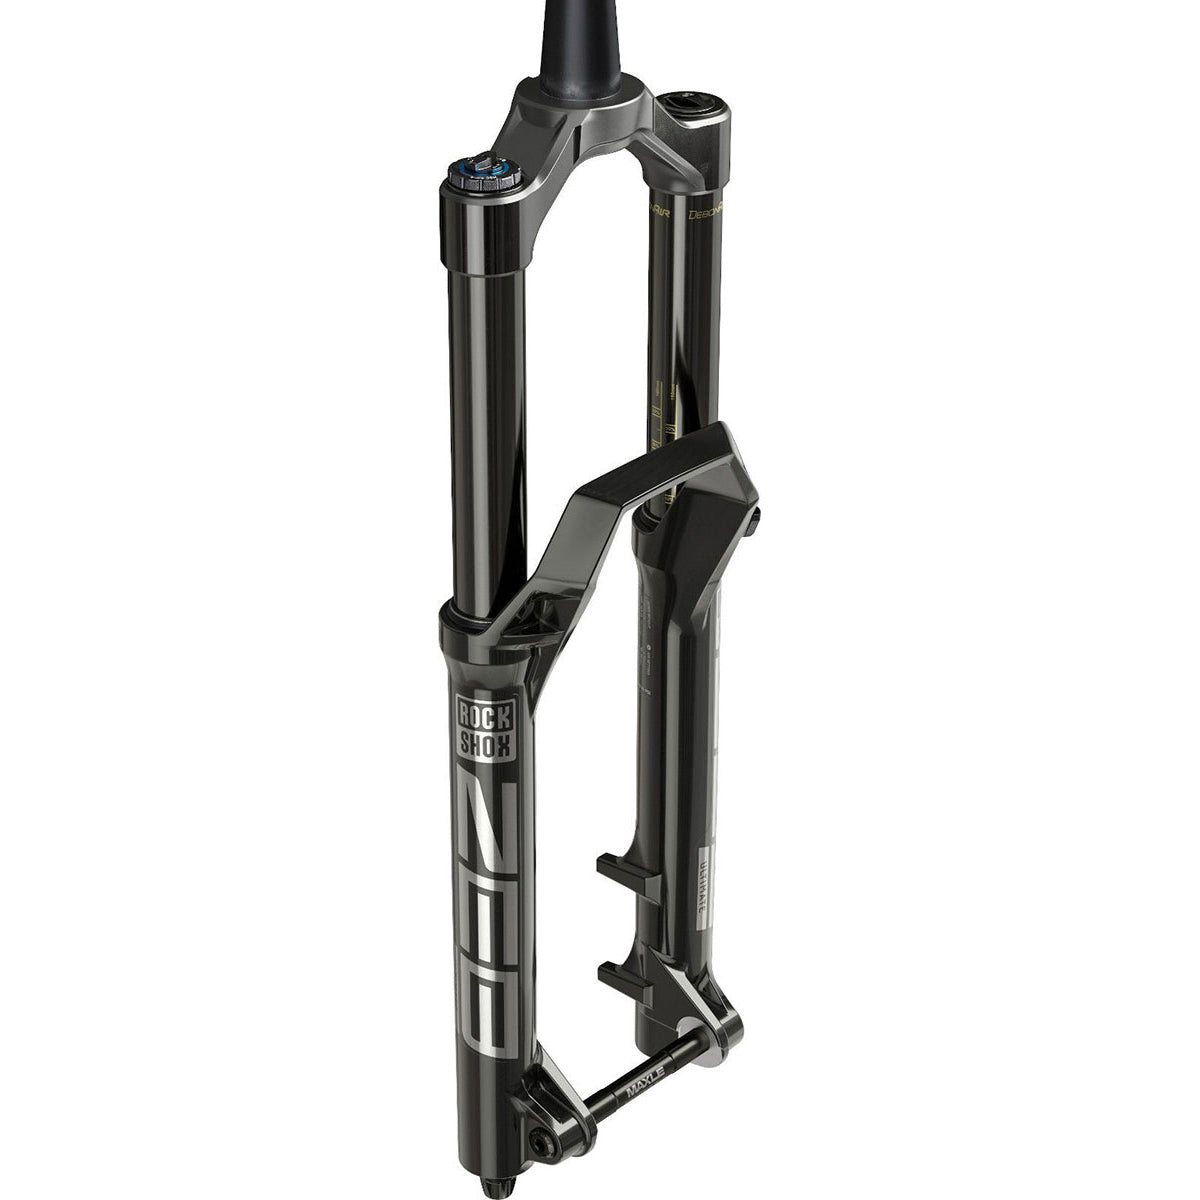 Rockshox Zeb Ultimate Charger 2.1 RC2 Debonair A1 Fork - Gloss Black - 15x110mm Boost - Maxle Stealth - 38mm - 170mm - 2021 - Tapered 1 1-8-1.5 Inch - 27.5 Inch